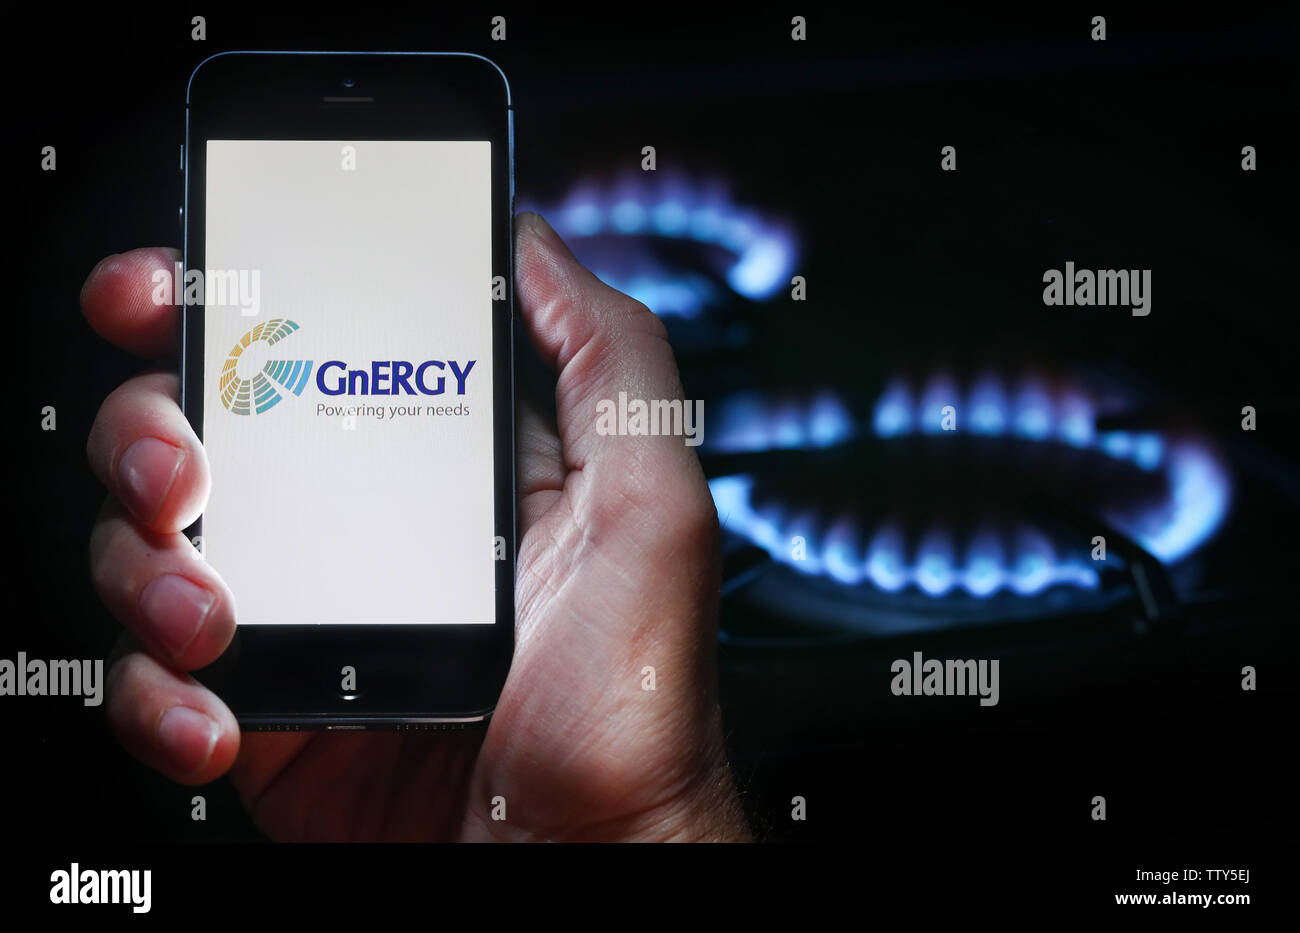 A man looking at the website logo for energy company GnERGY on his phone in front of his gas cooker (editorial use only) Stock Photo